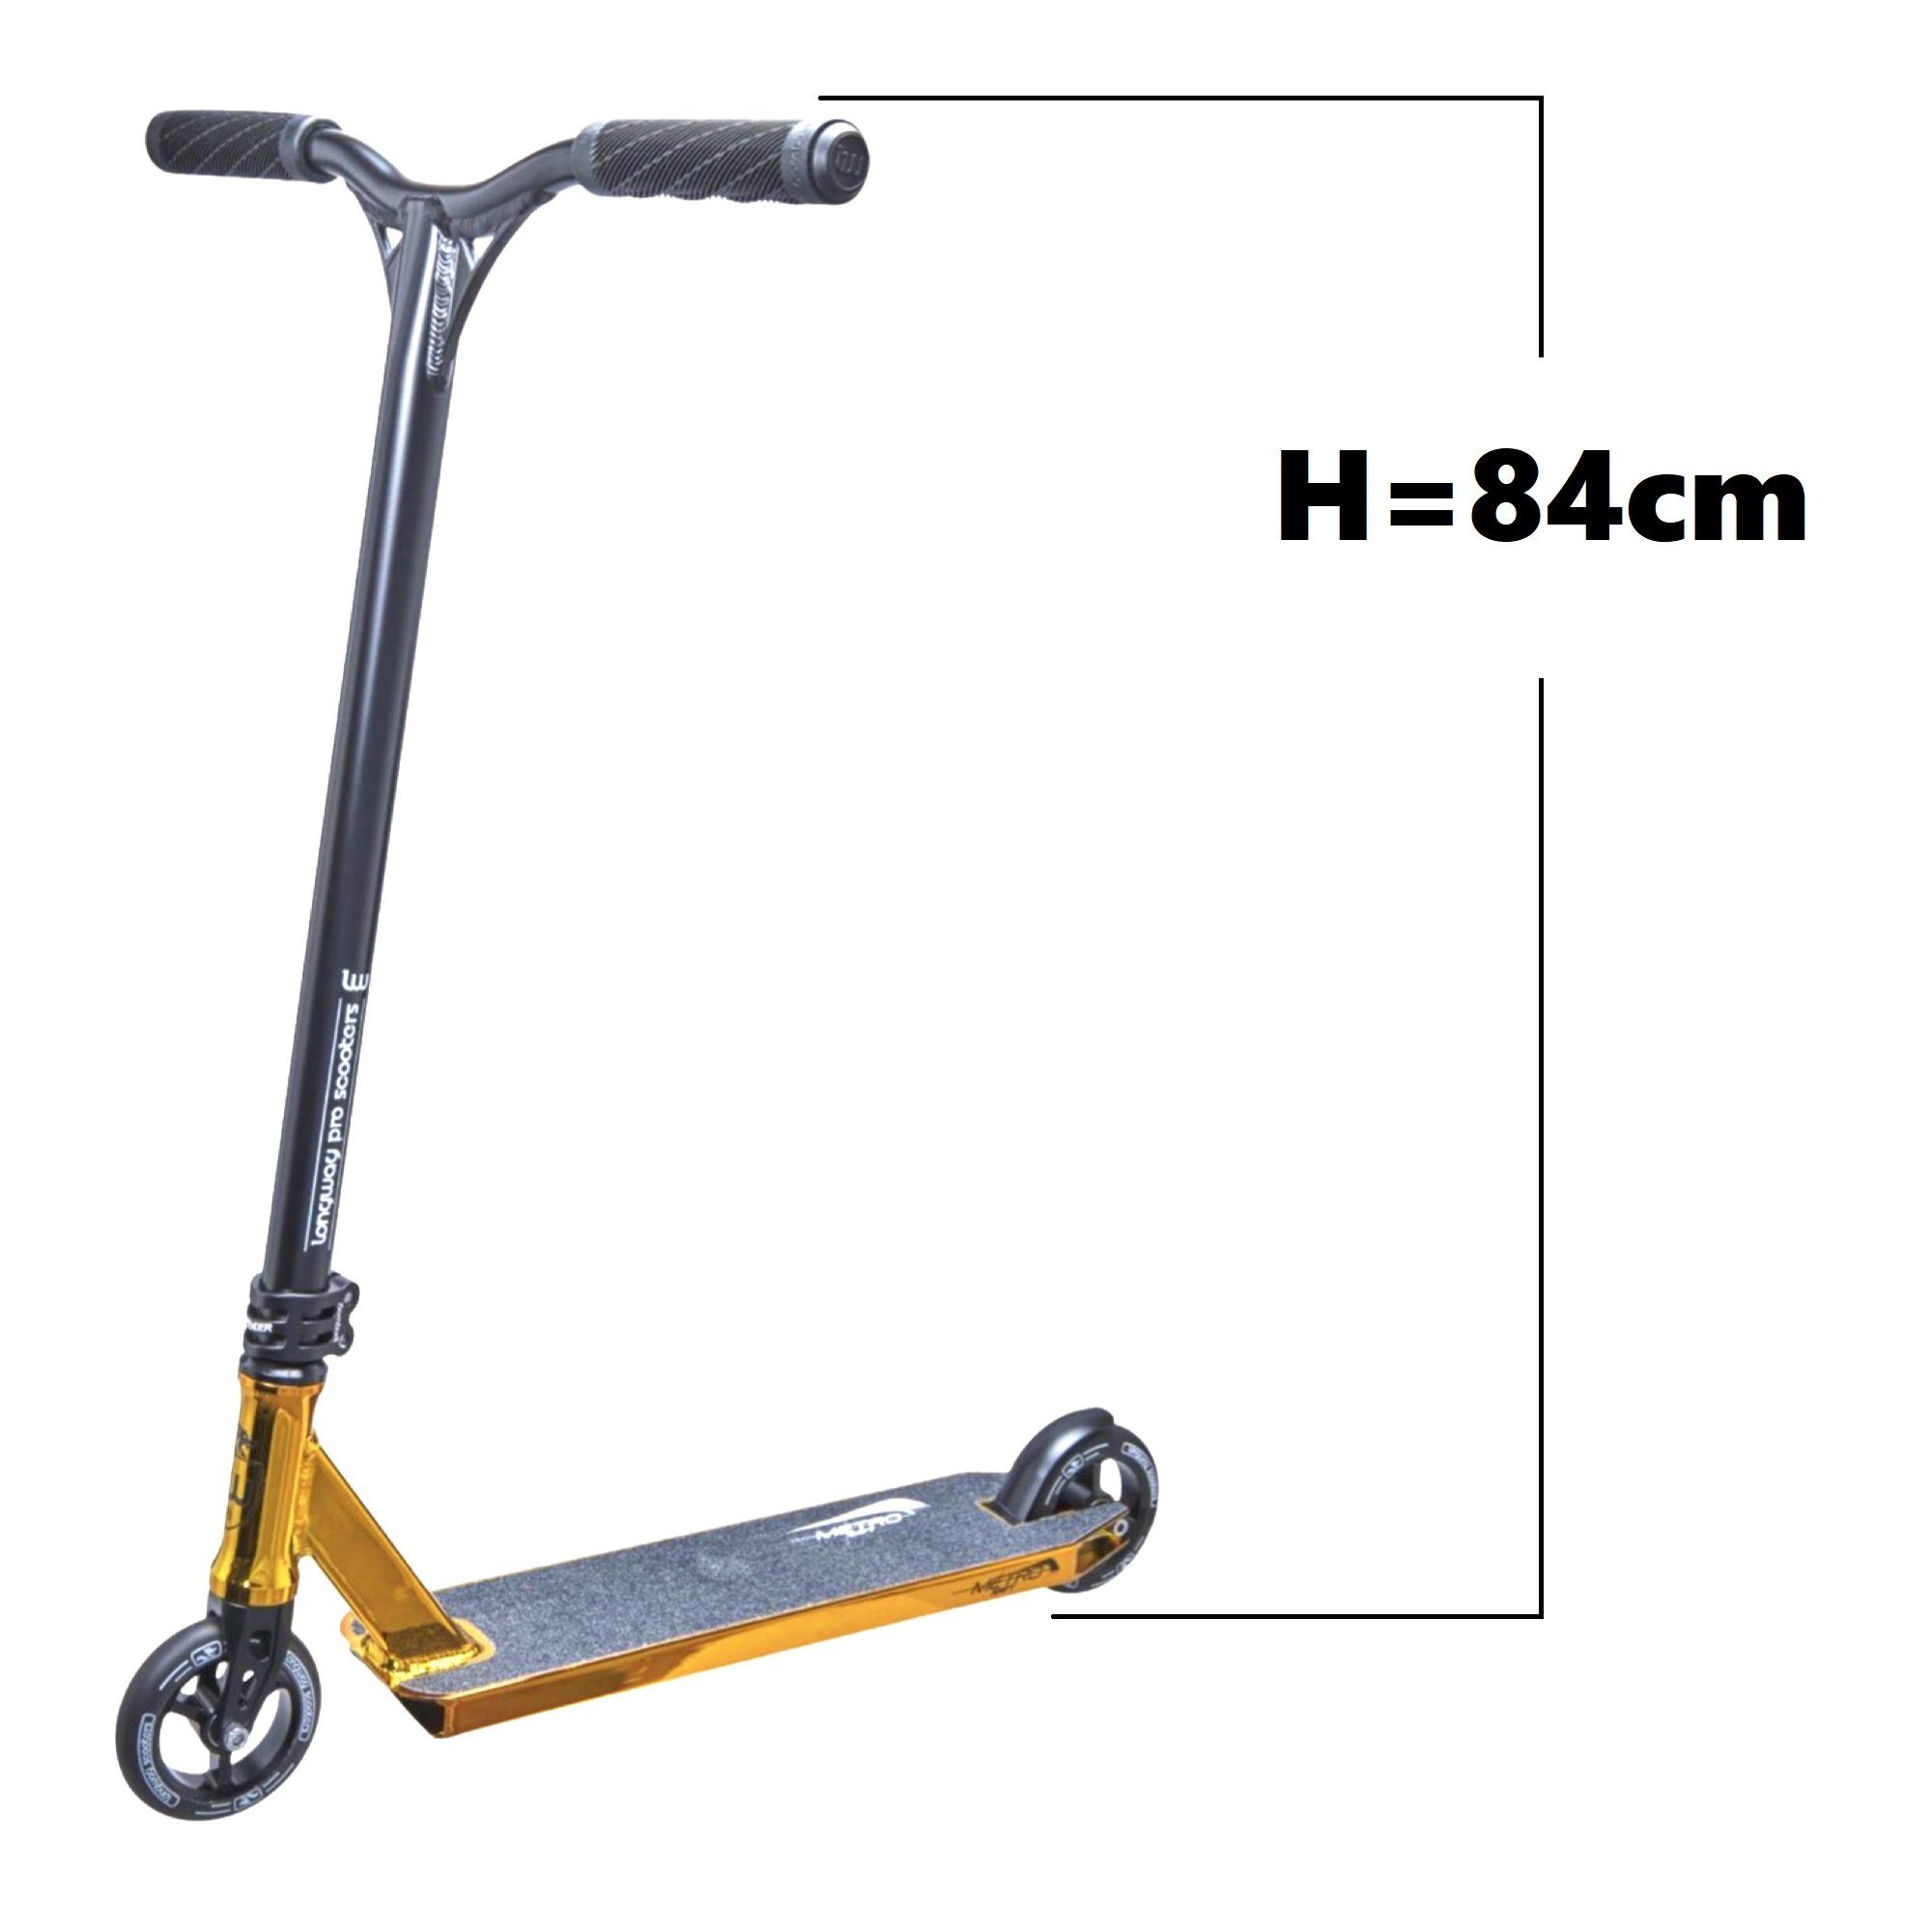 Metro Topaz H=84cm Scooters Longway Stunt-Scooter Shift Longway Stuntscooter